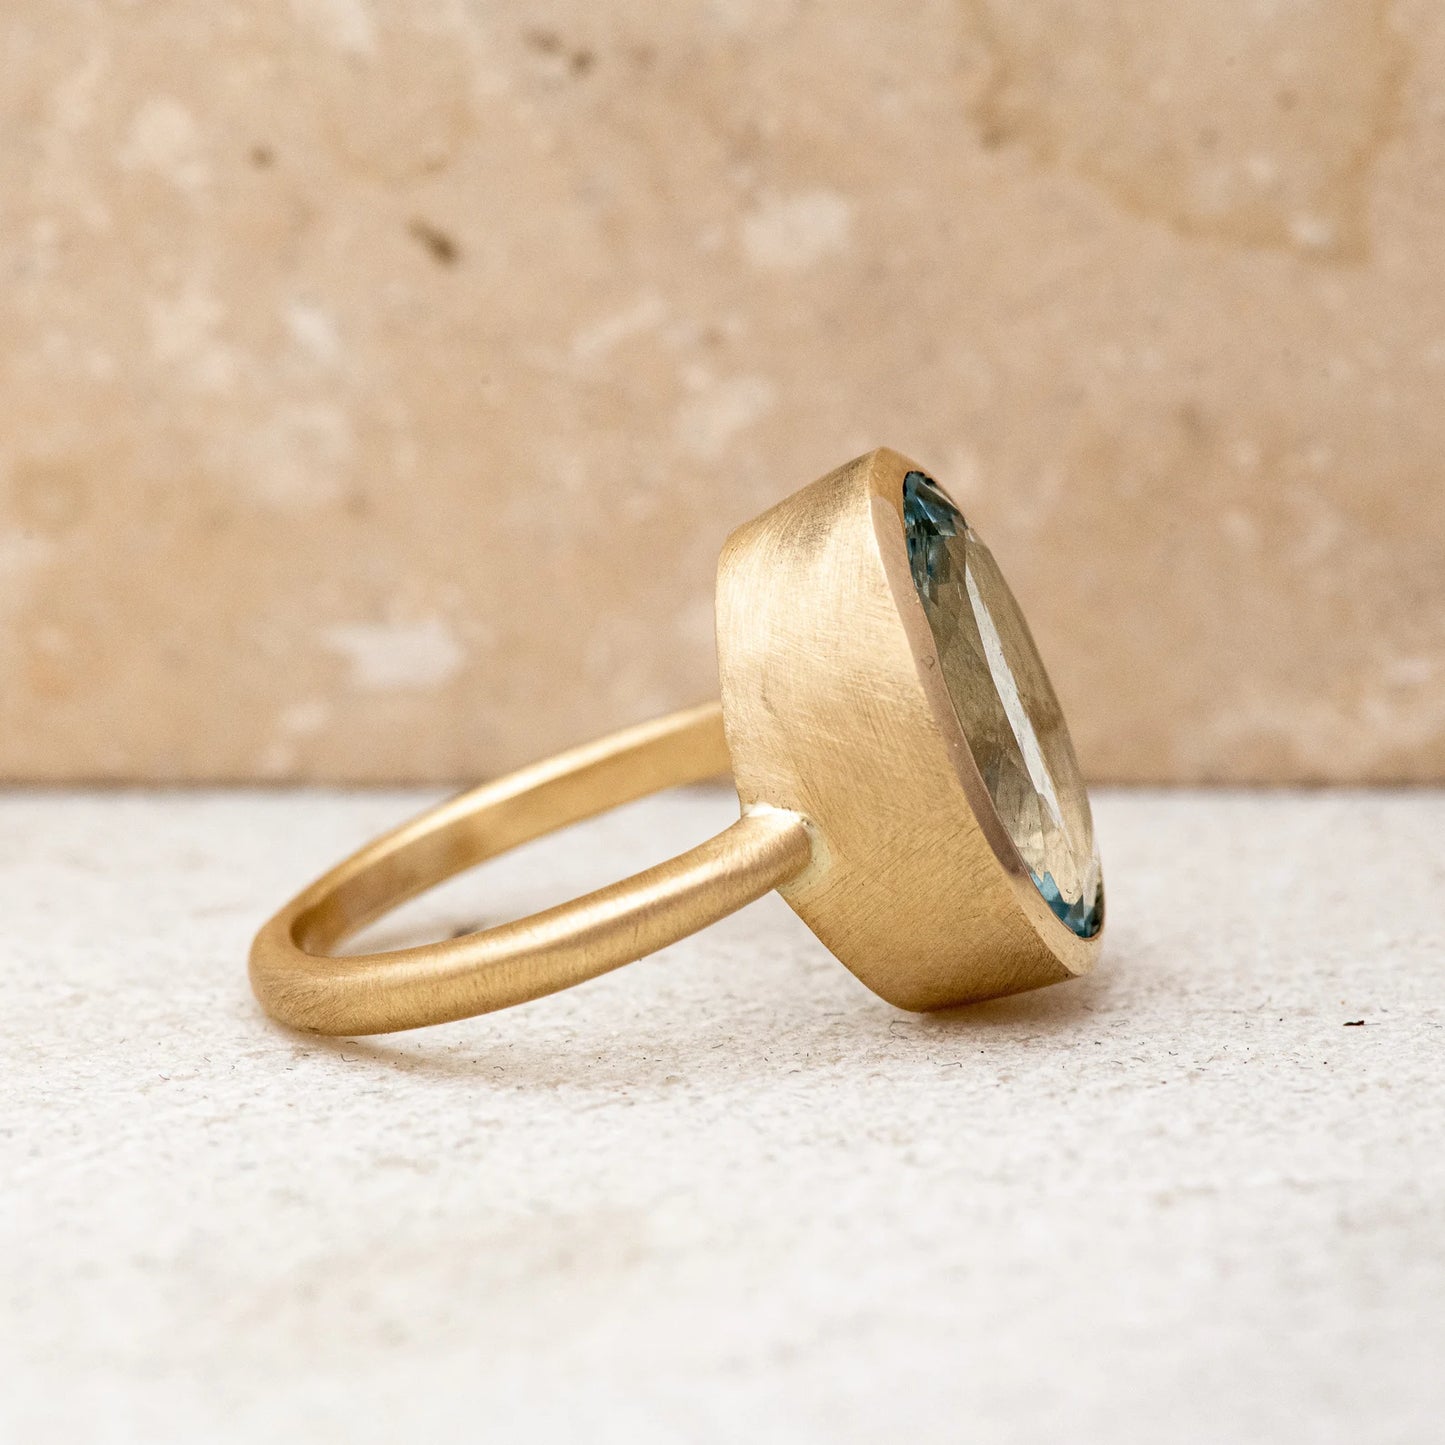 A Large Oval Aquamarine Ring in Yellow Gold with a blue topaz stone, handmade by Cassin Jewelry.